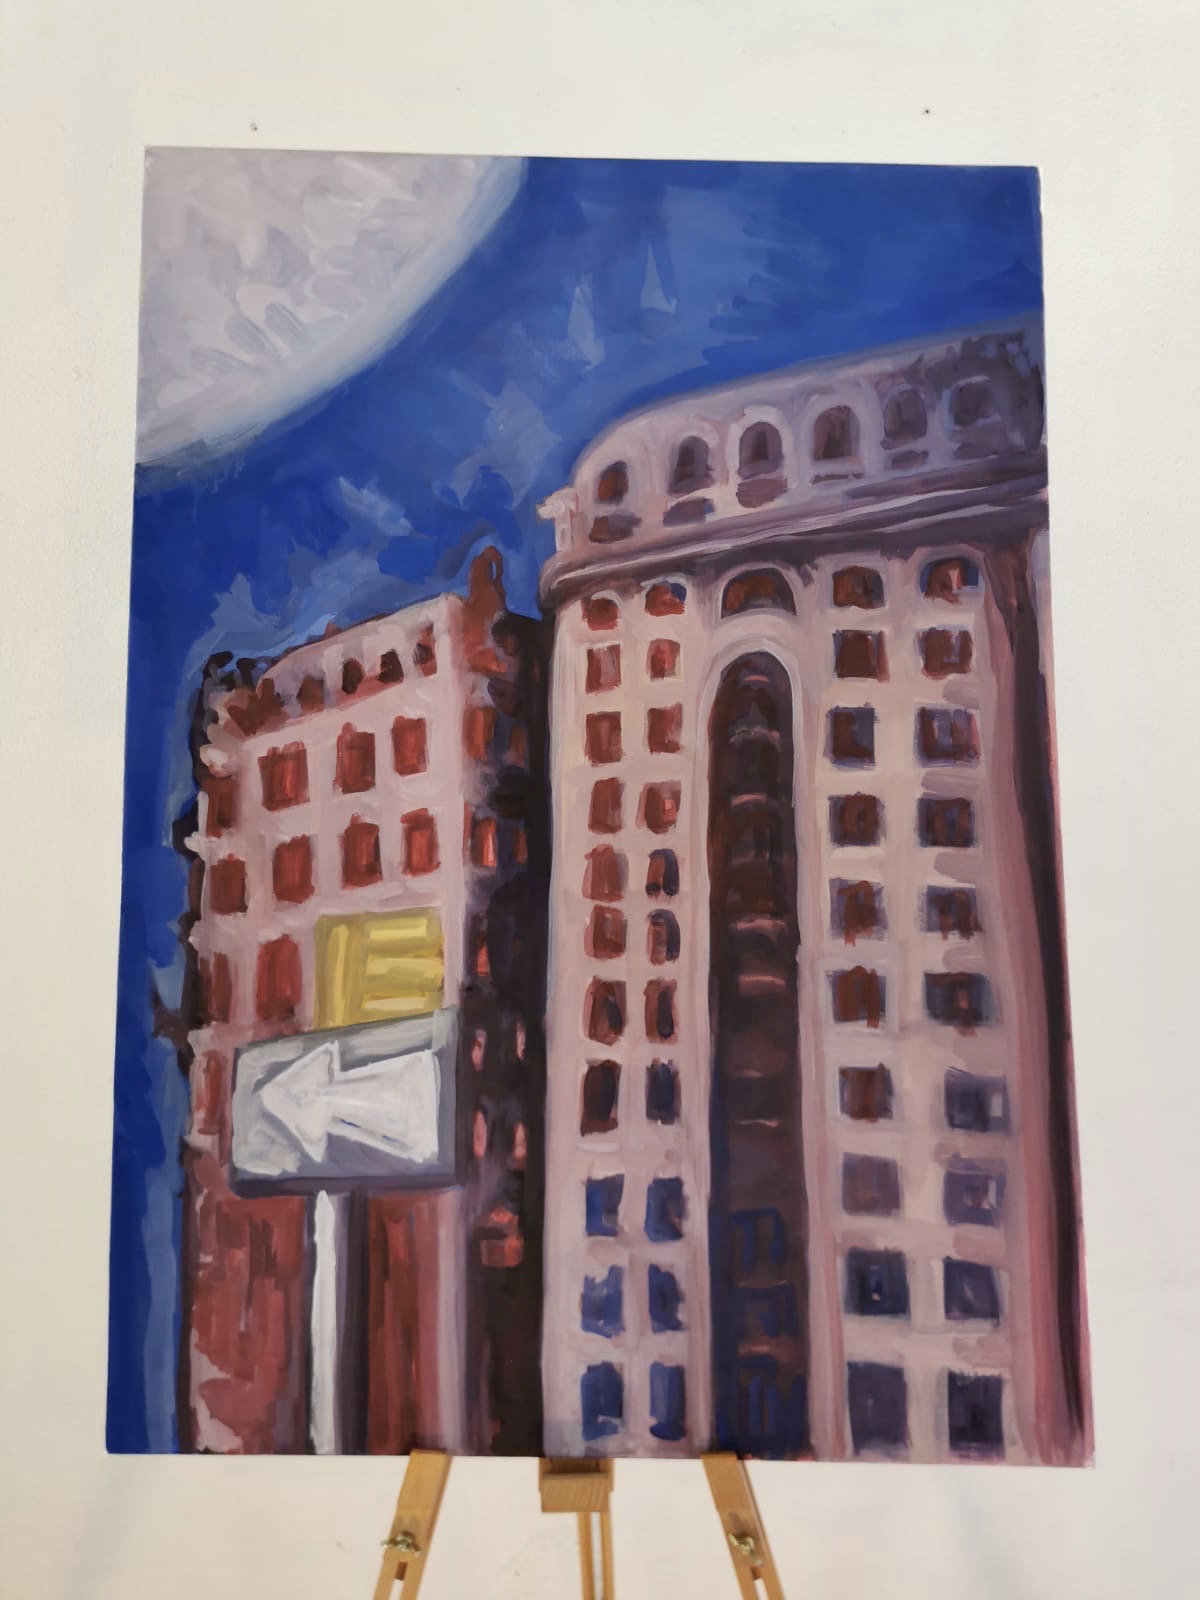 Oil on canvas 65 x 90cm. Painting depicting two tall buildings based on the novel 'Seize the Day' by Saul Bellow, by Naomi Scott